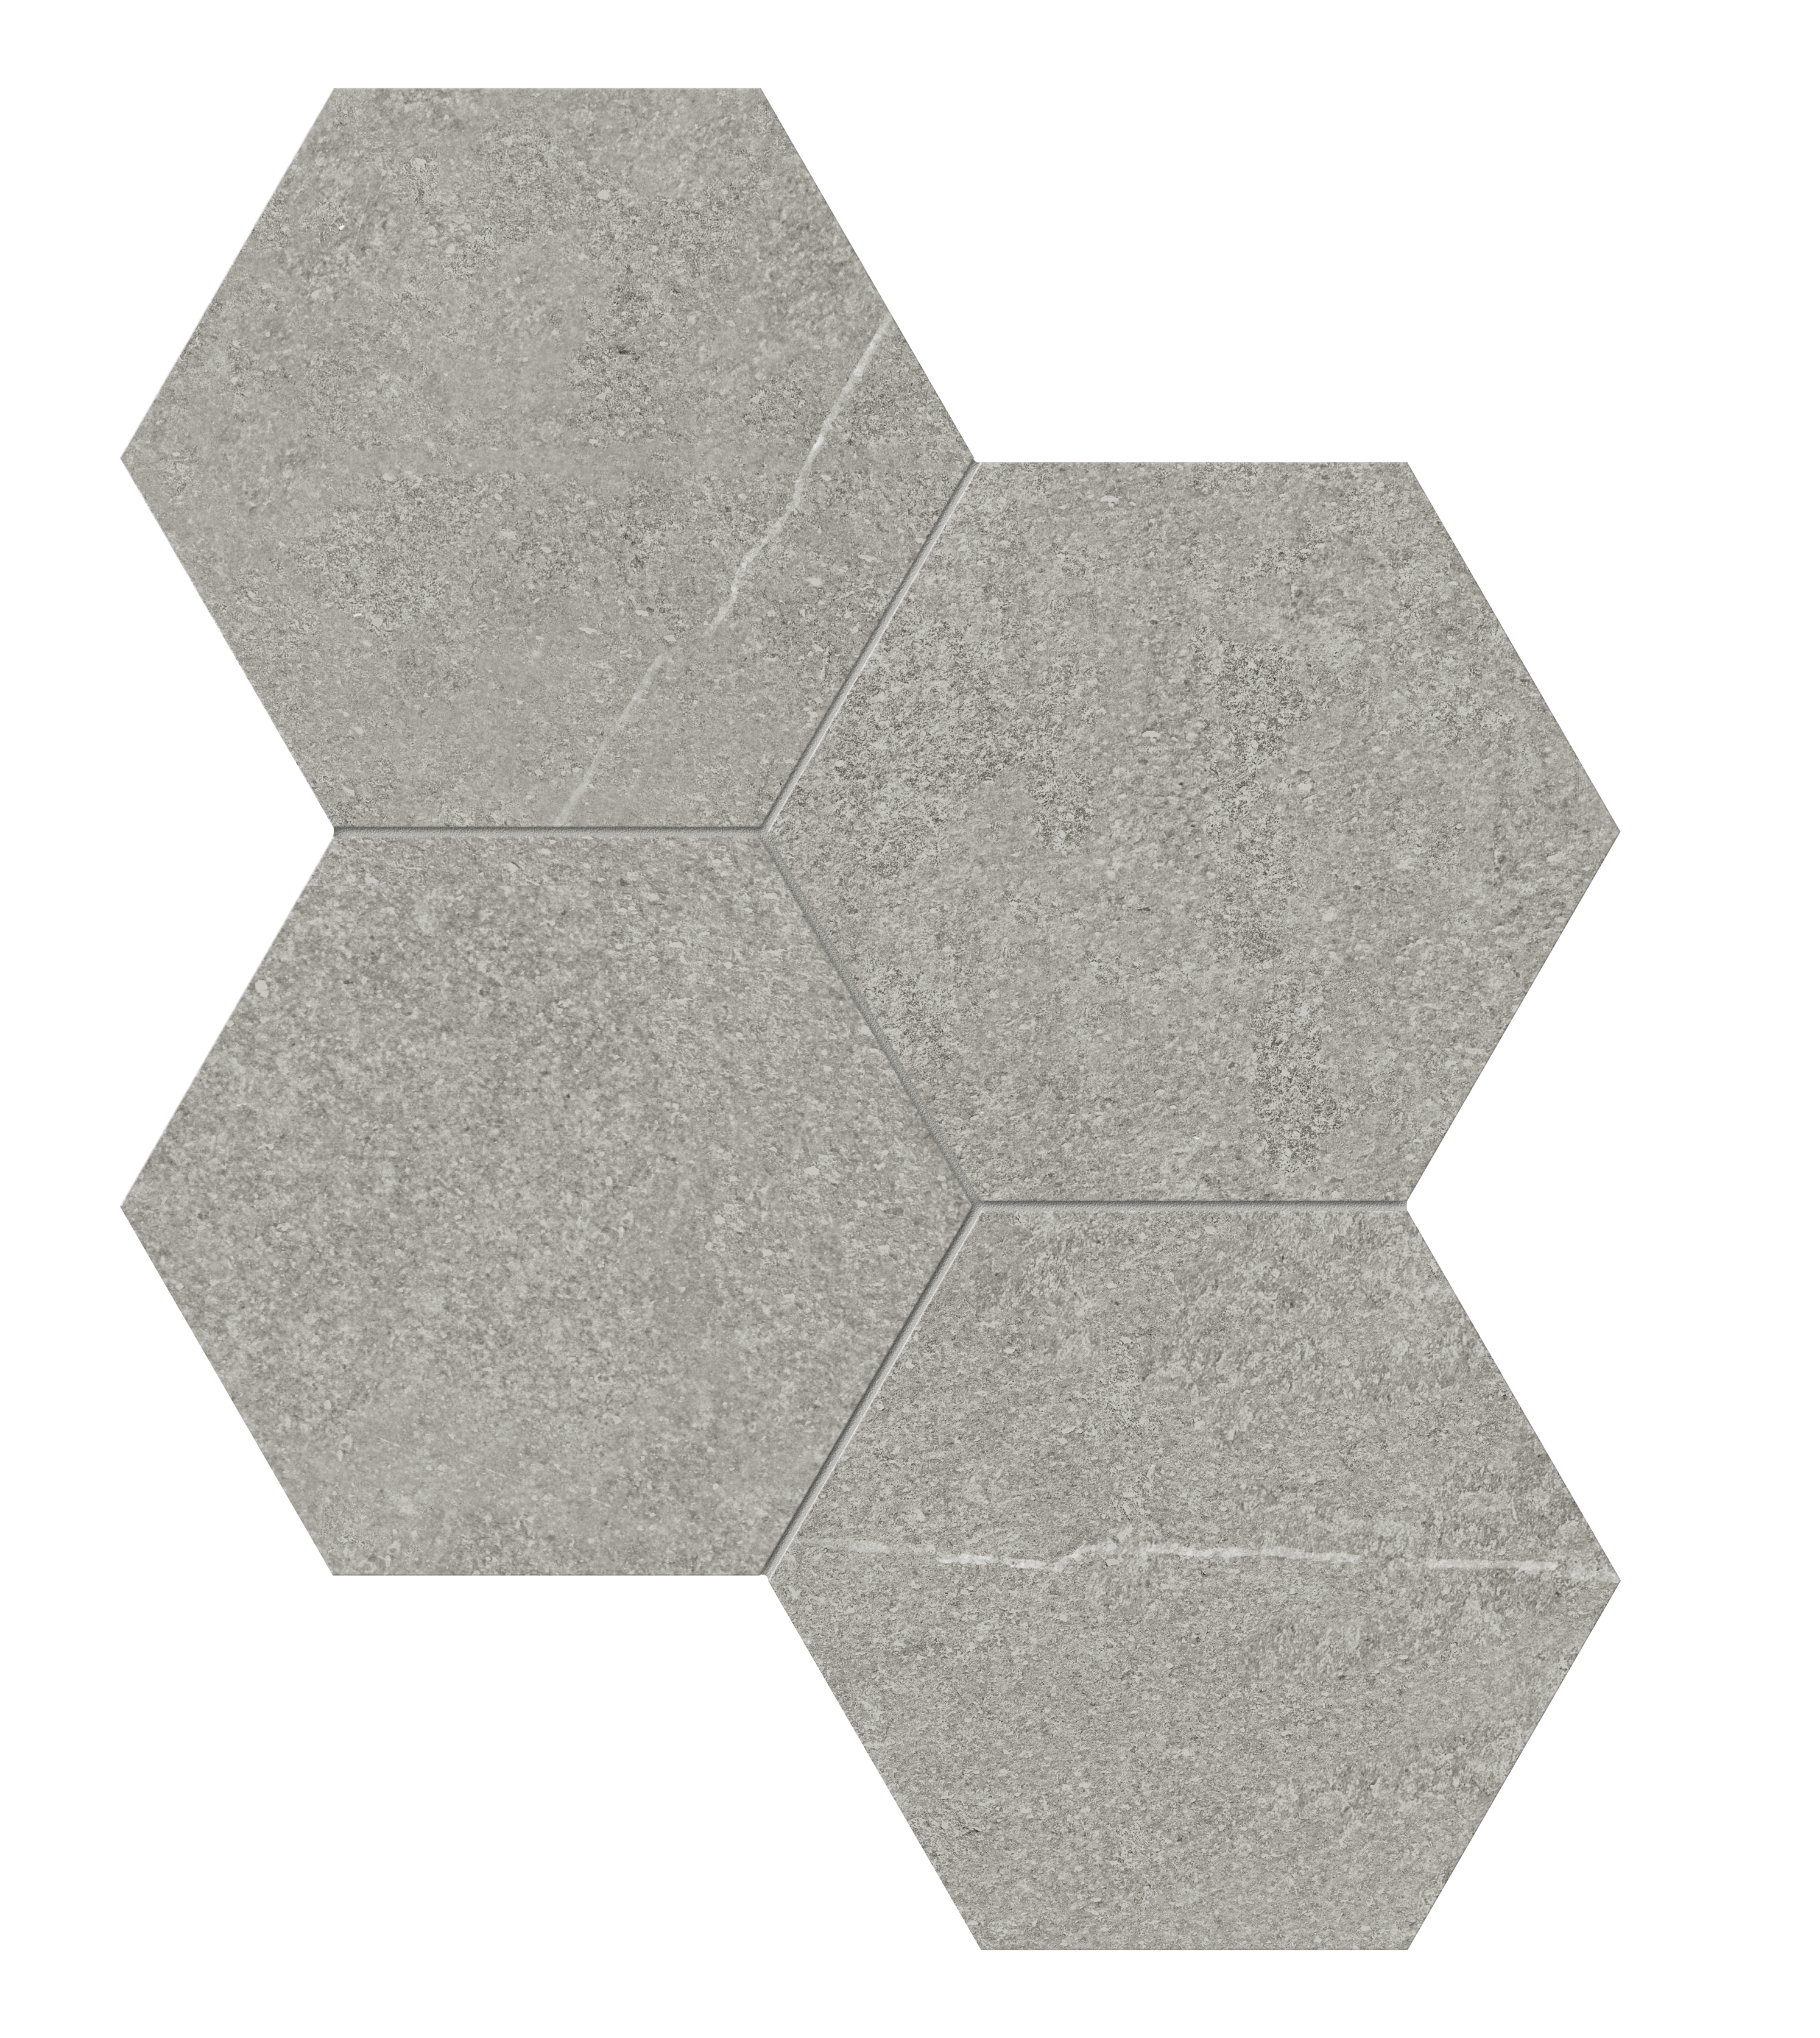 clay hexagon 6-inch pattern color body porcelain mosaic from mjork anatolia collection distributed by surface group international matte finish straight edge edge mesh shape